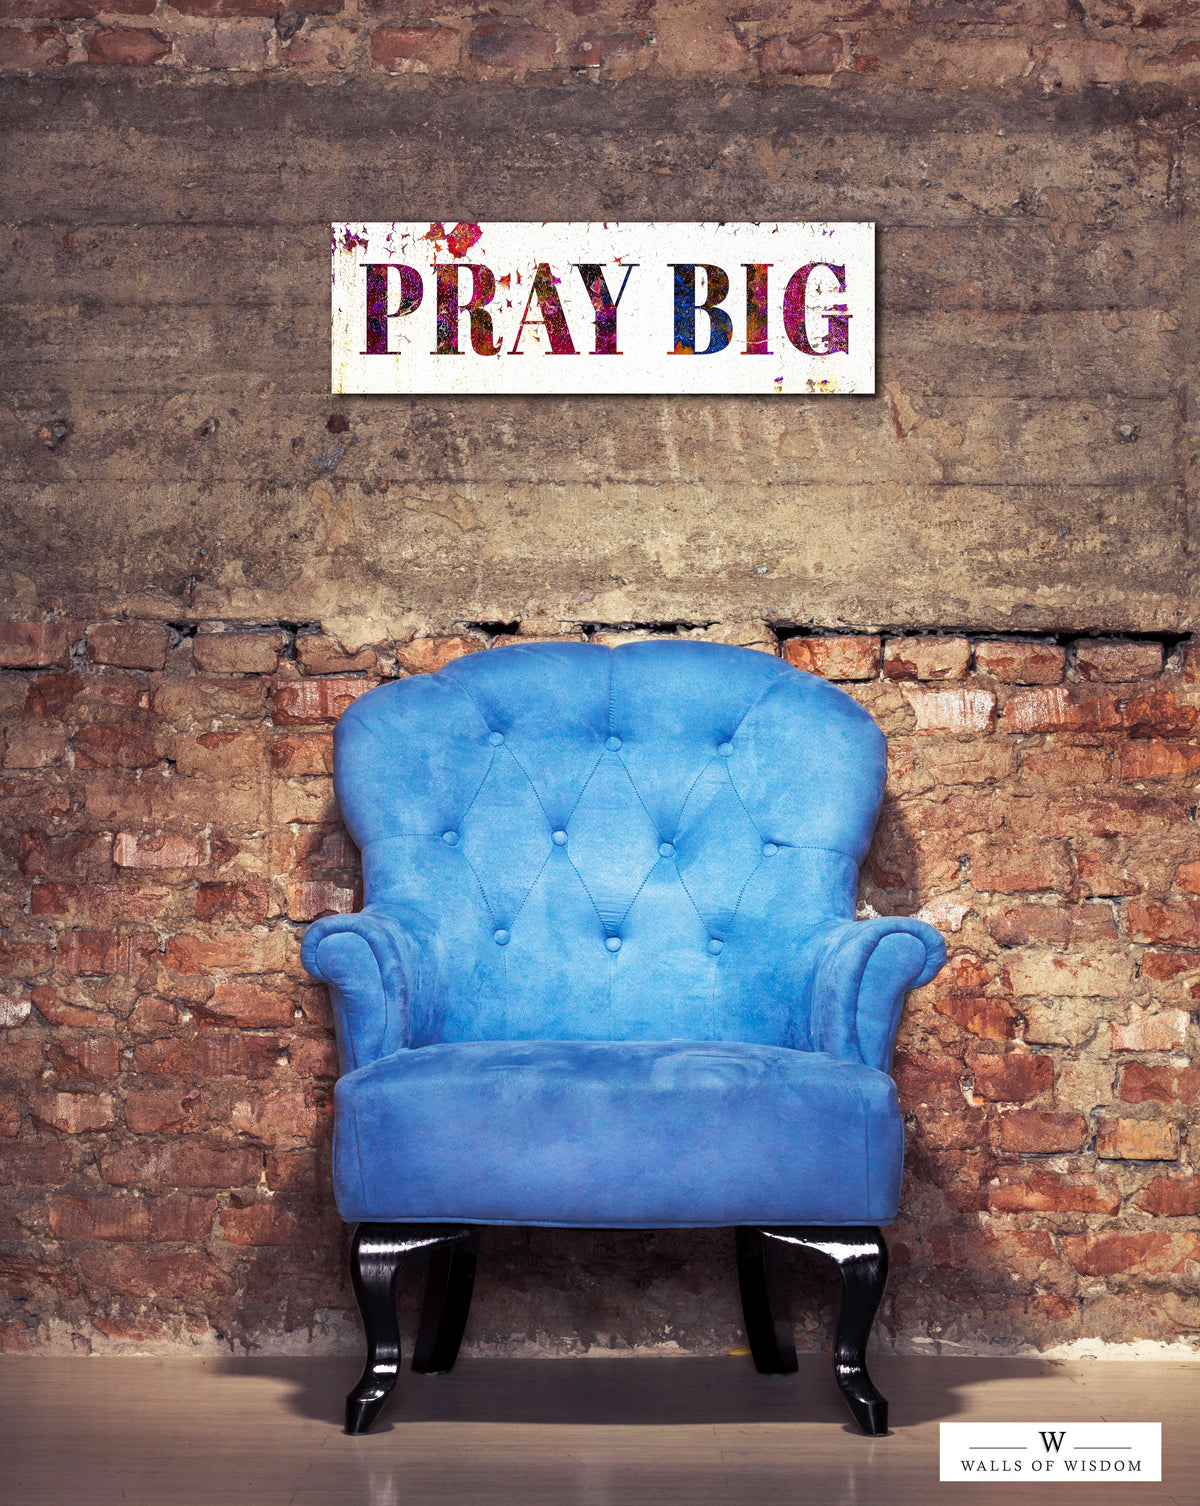 Pray Big Canvas Sign - Colorful Christian Rustic Wall Art for Living Room